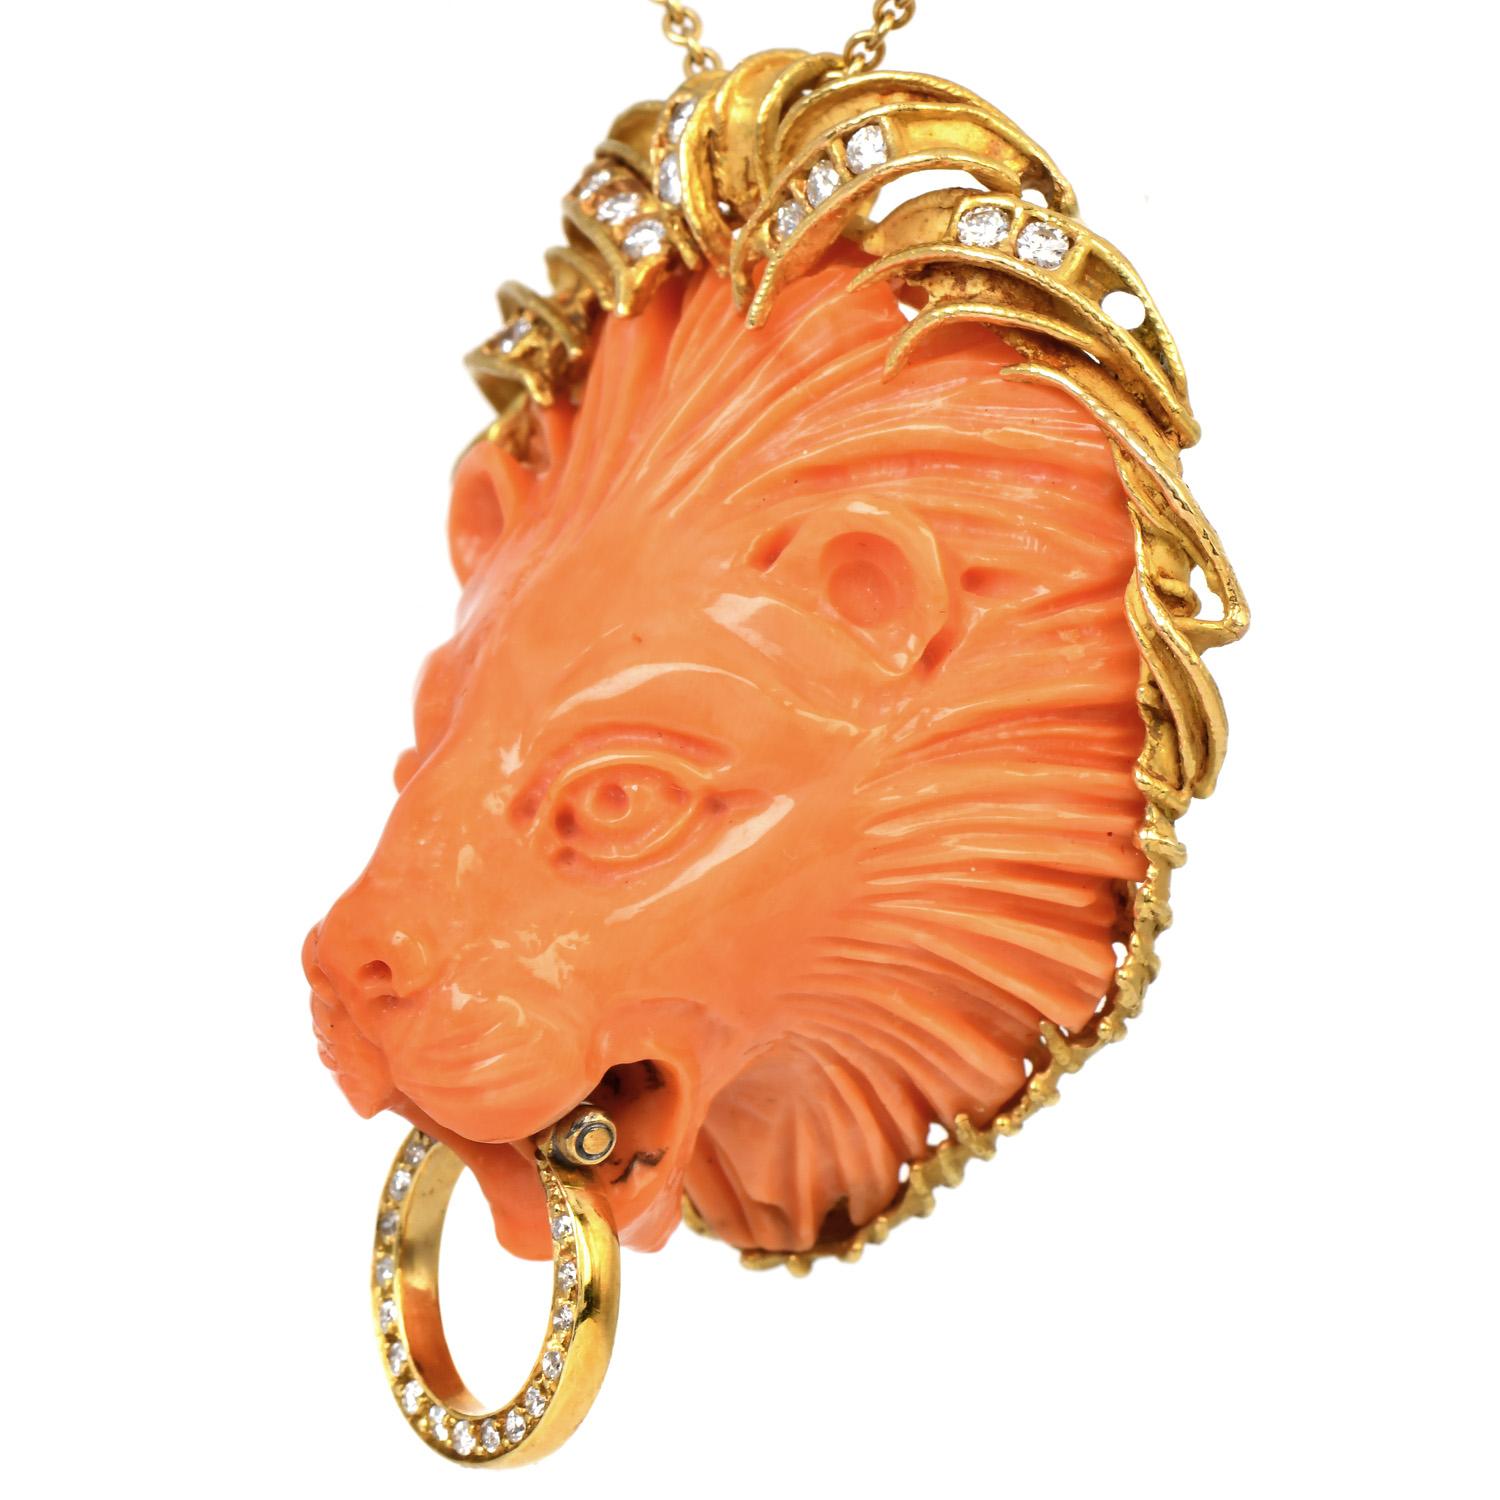 Enjoy This Masterpiece from the 1970s era. The lion symbolizes majesty, courage, strength, and sensuality. This Coral Lion's Head Cocktail pendant, with an exquisite carving, is framed around an 18k yellow gold. 

This pendant is Handcarved from